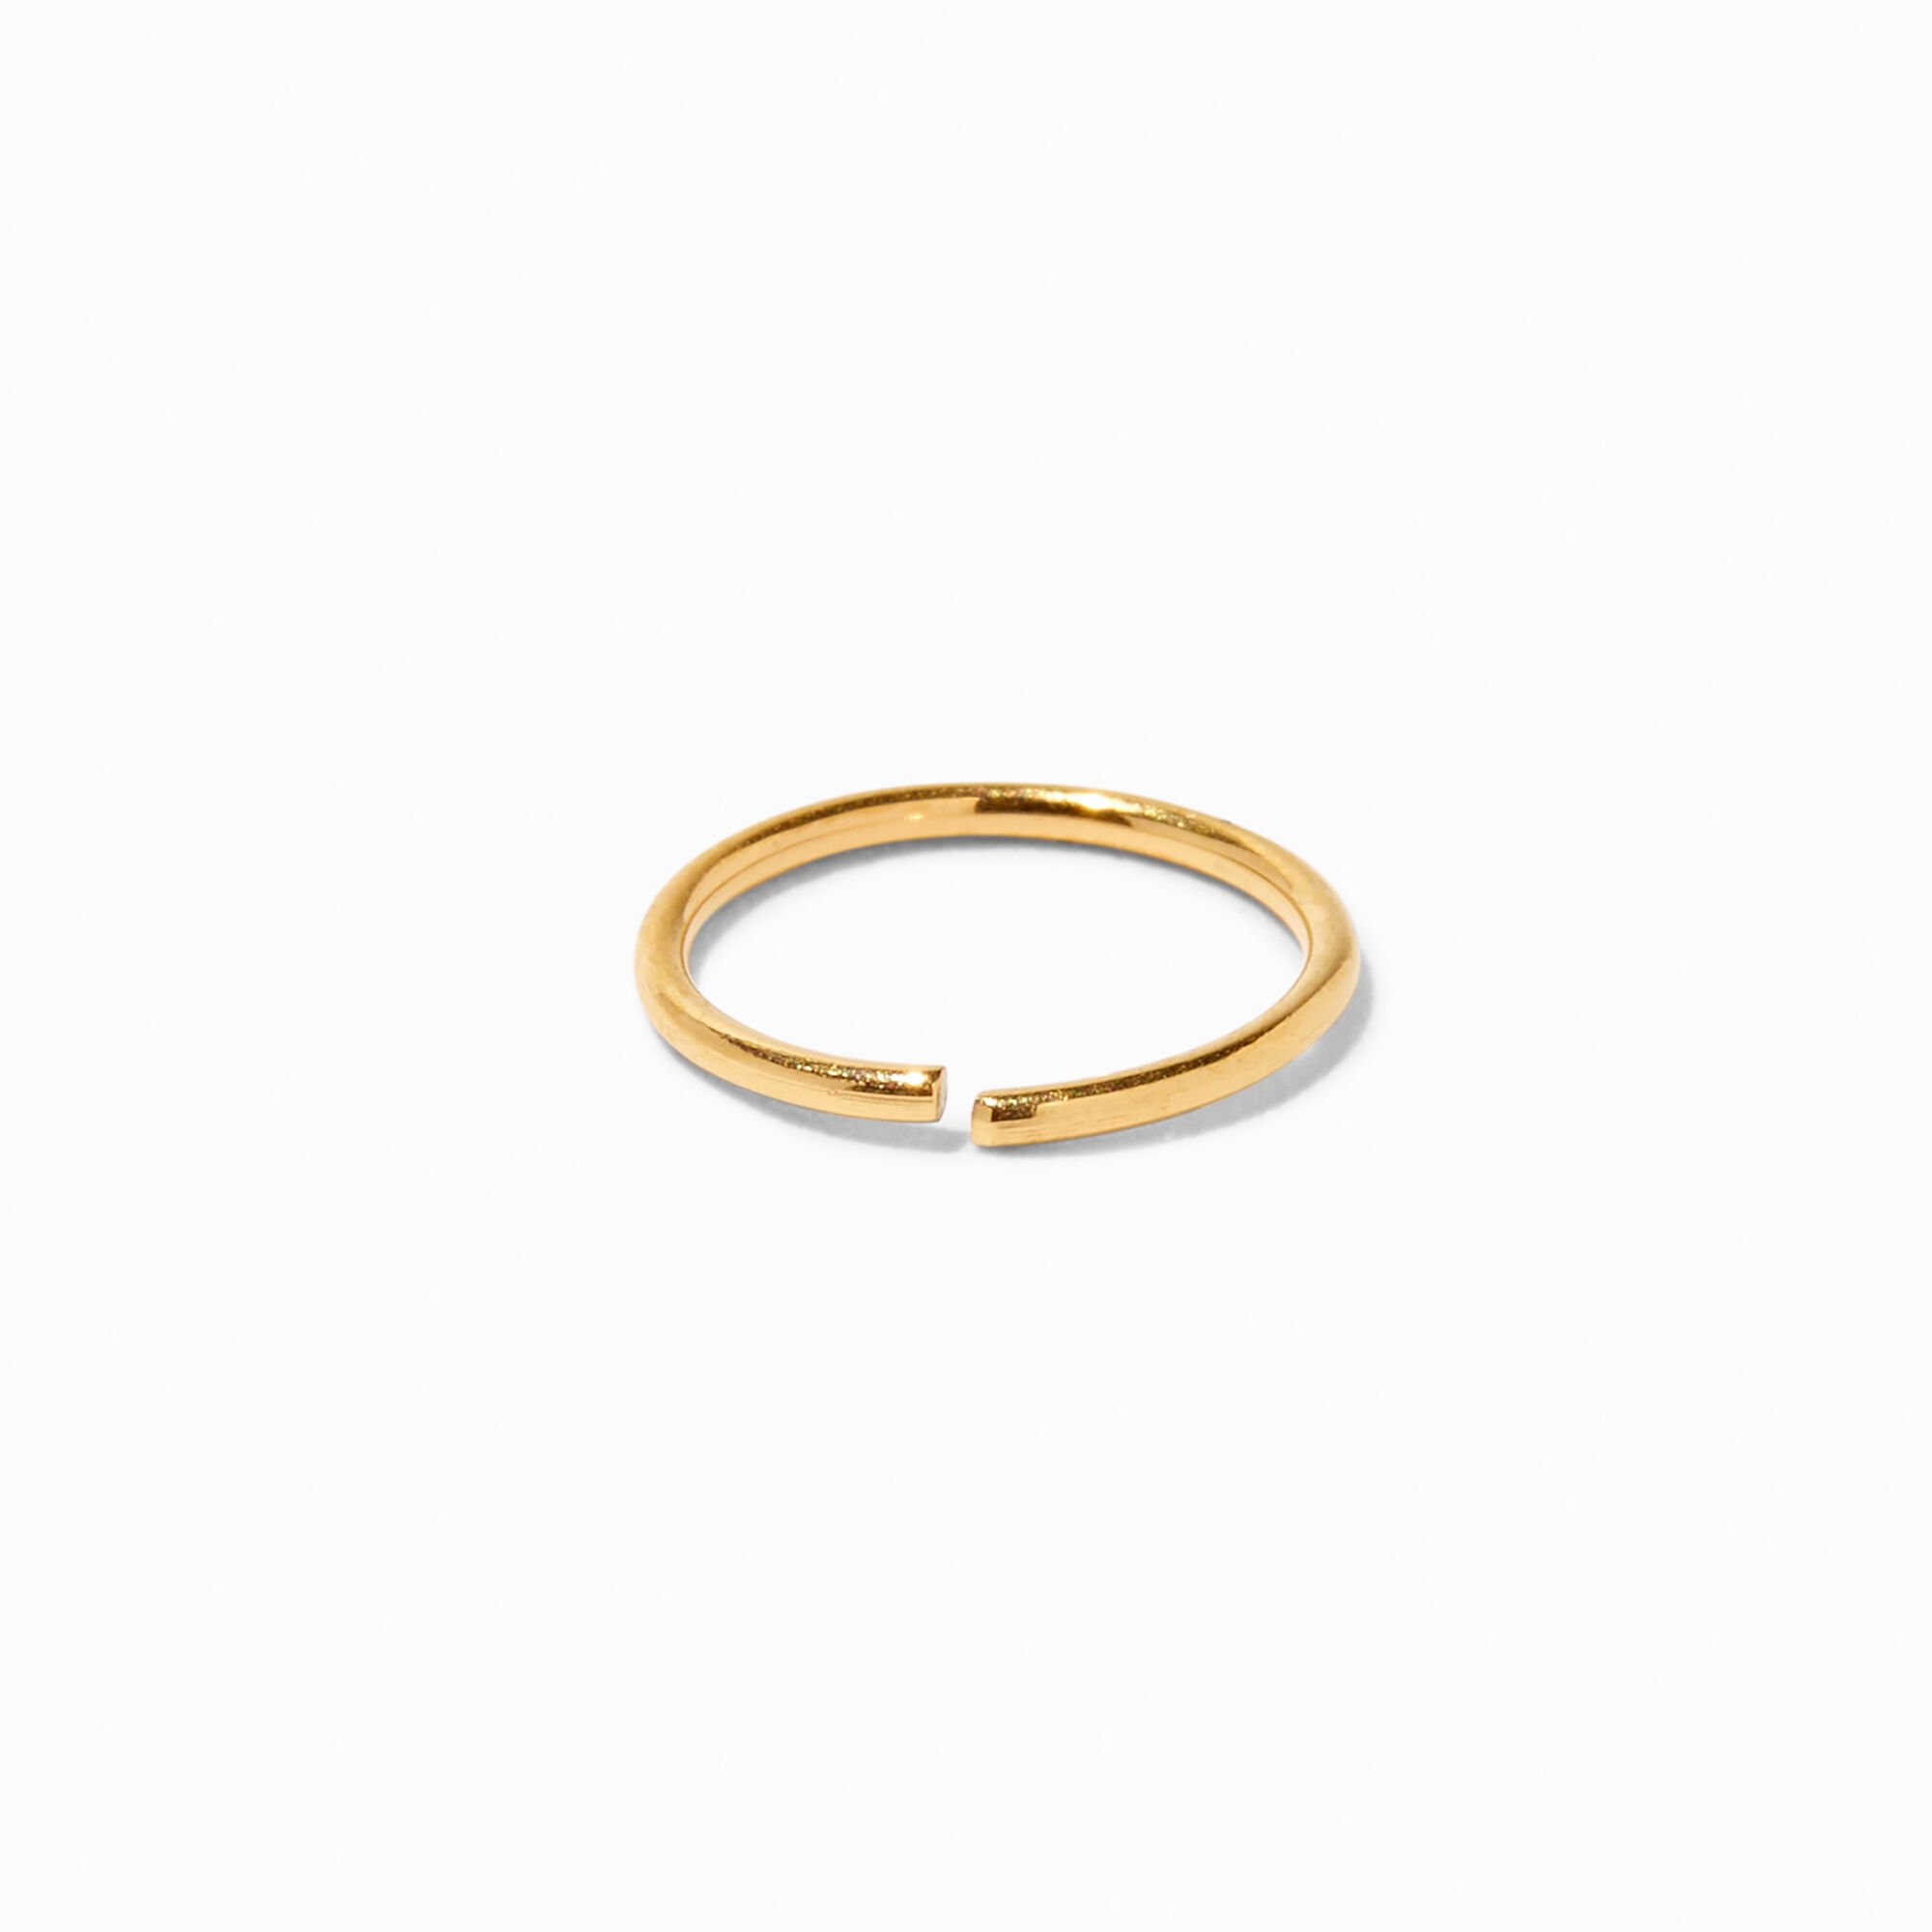 View Claires Tone 20G Titanium Hoop Nose Ring Gold information